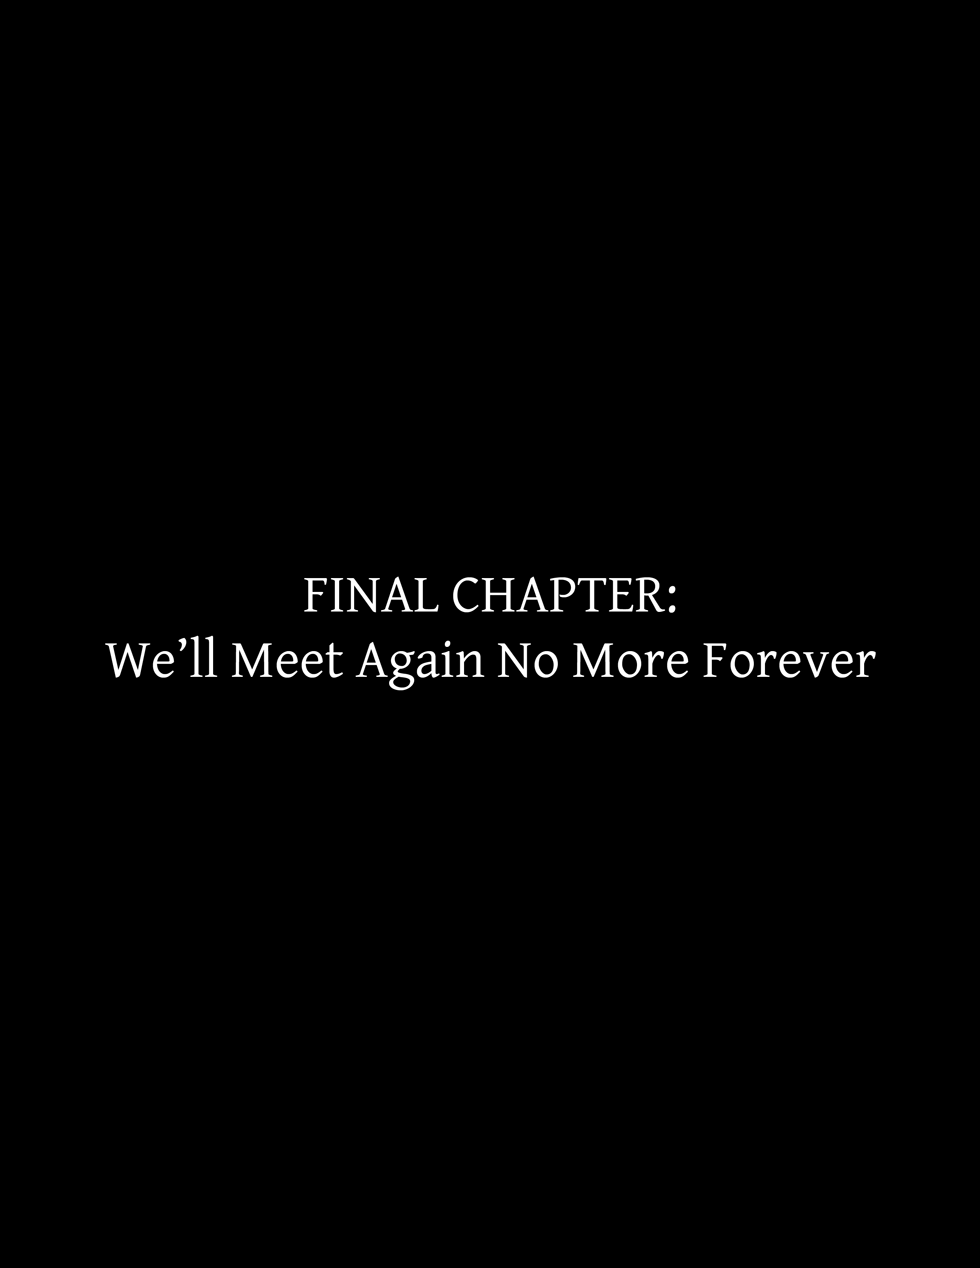 Final Chapter: We’ll Meet Again No More Forever